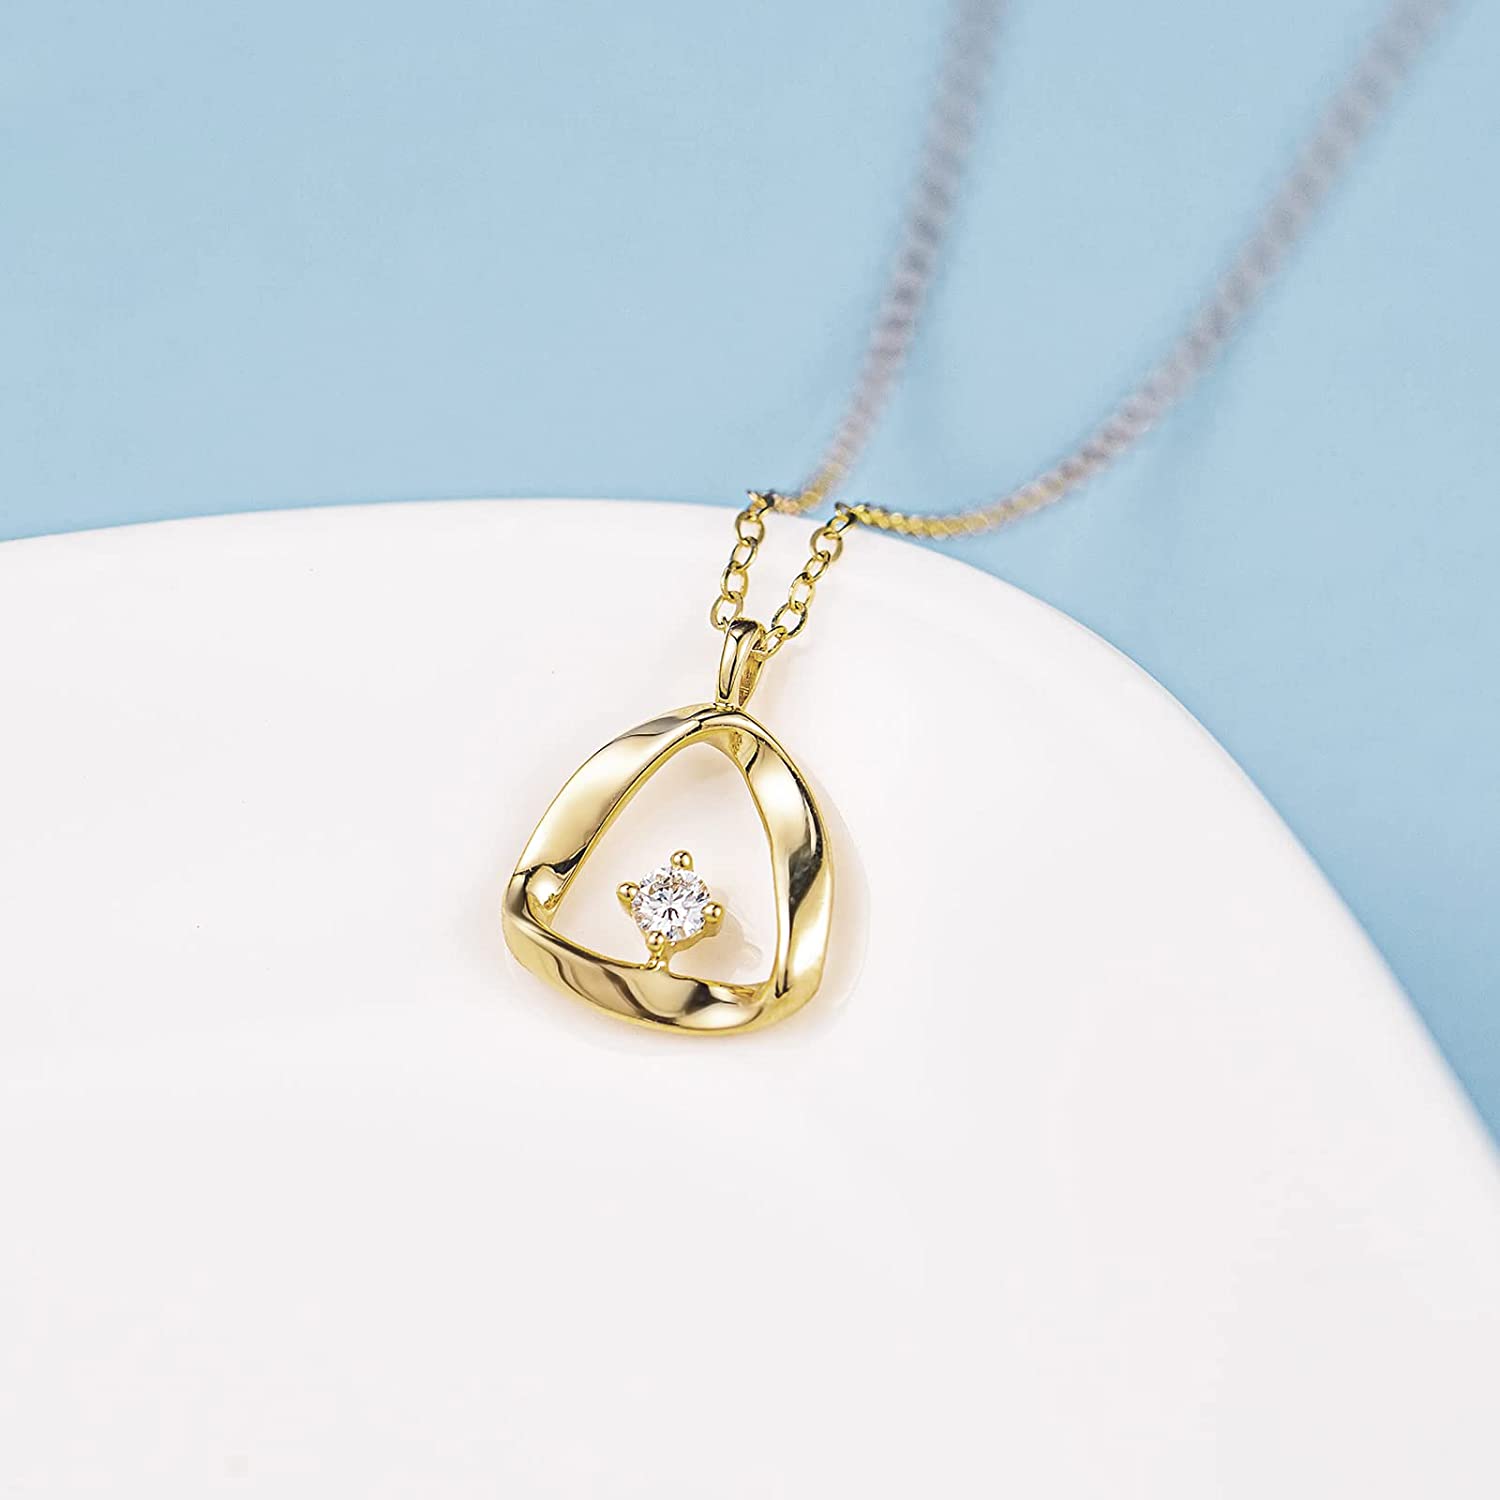 FANCIME "The One" Mobius Triangle Shape 14K Solid Yellow Gold Necklace Detail